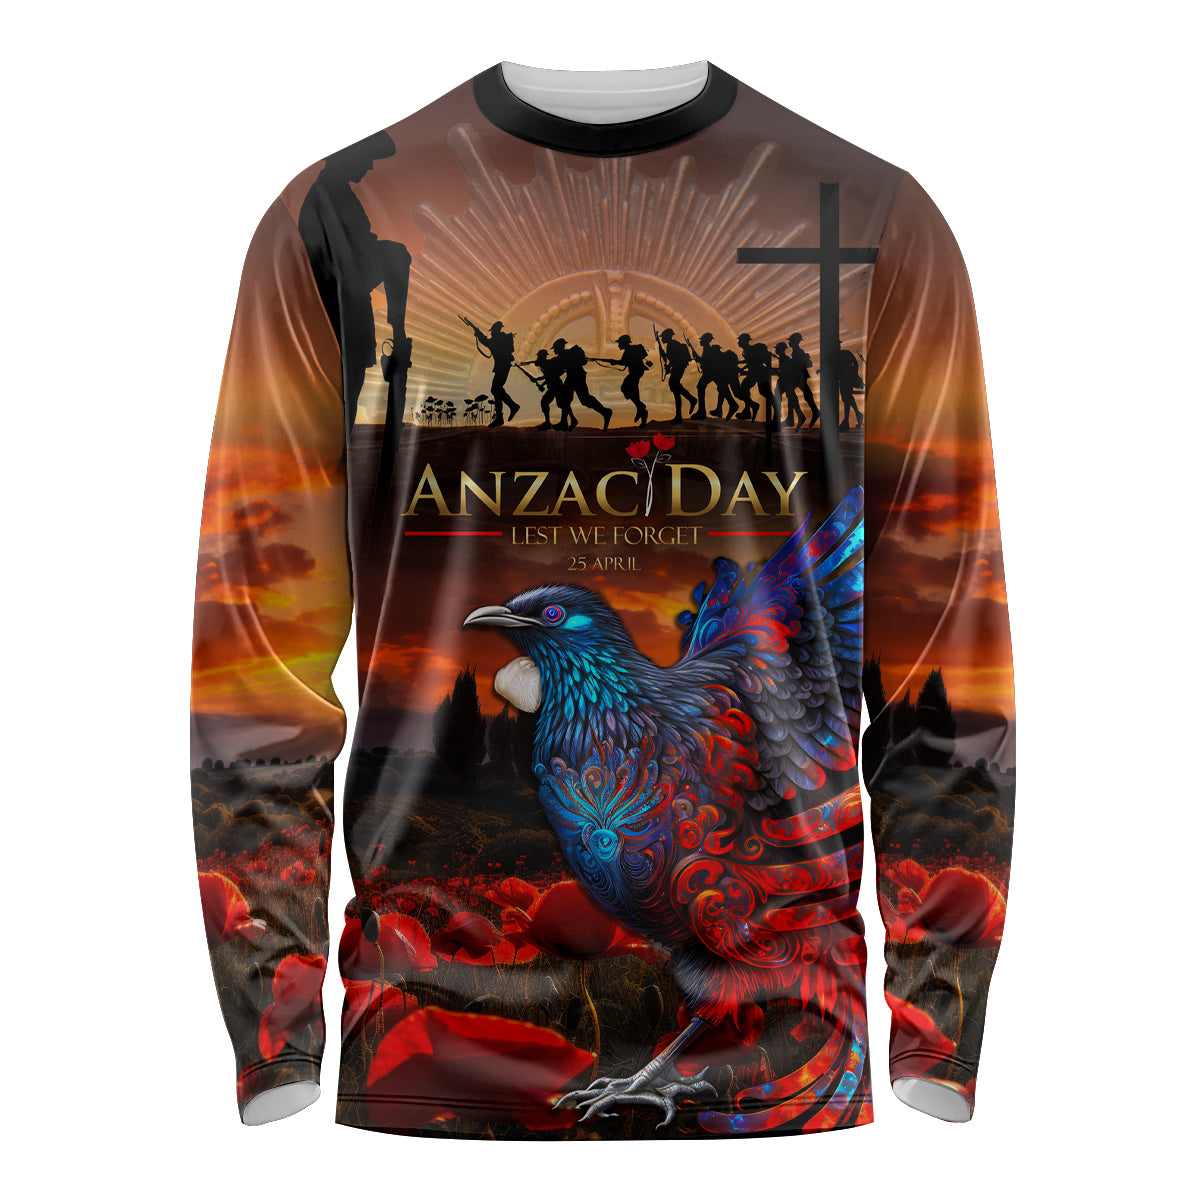 New Zealand Tui Bird Soldier ANZAC Long Sleeve Shirt Lest We Forget LT03